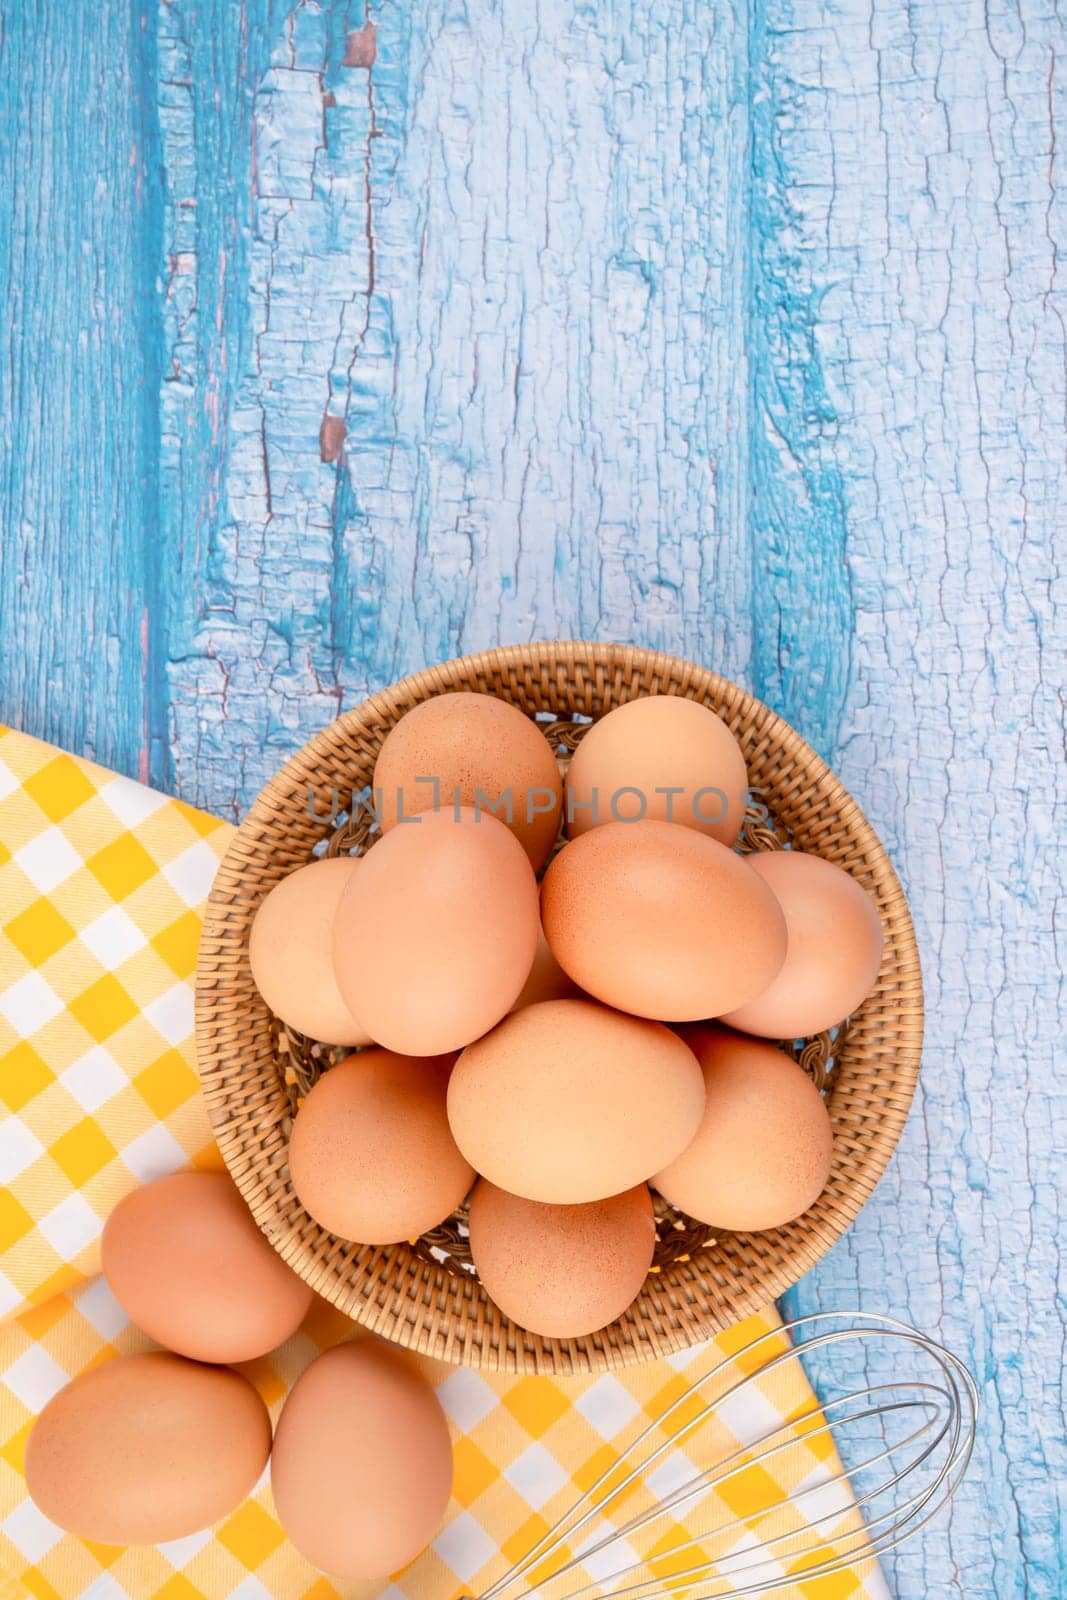 Overhead view of brown chicken eggs in weave basket and a whisk on blue wooden background.